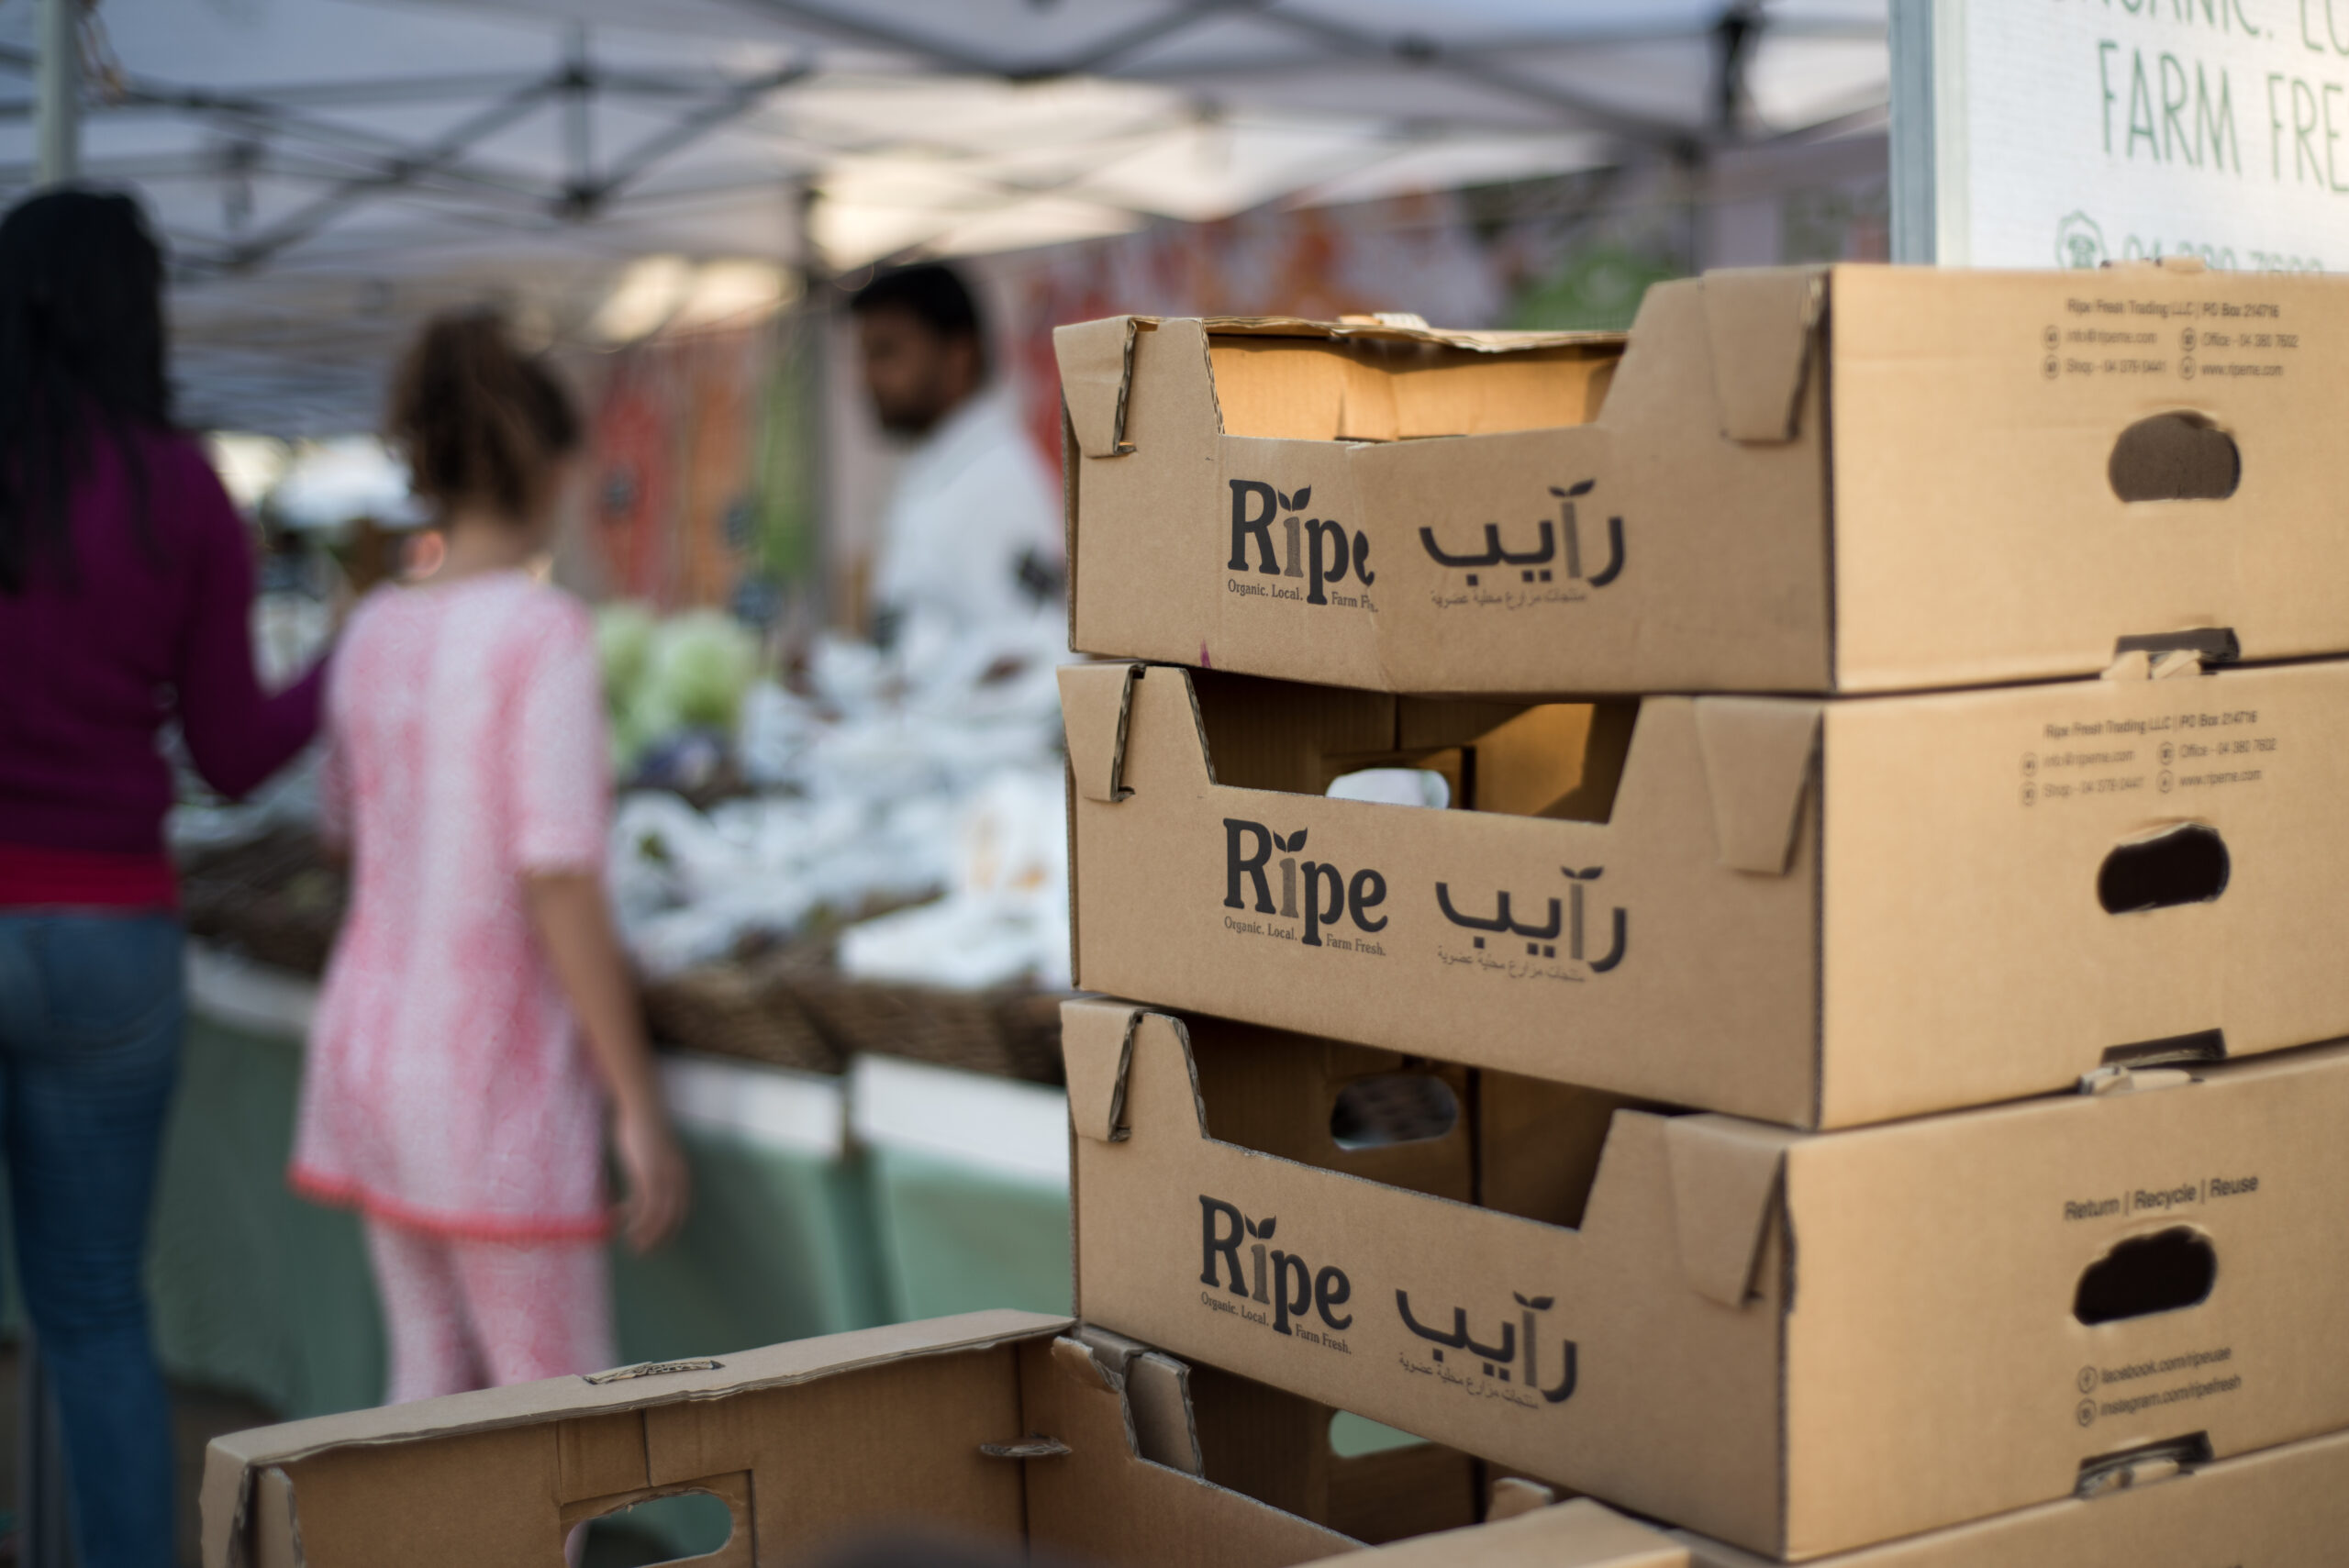 Best finds: Shopping at Ripe Market 2021